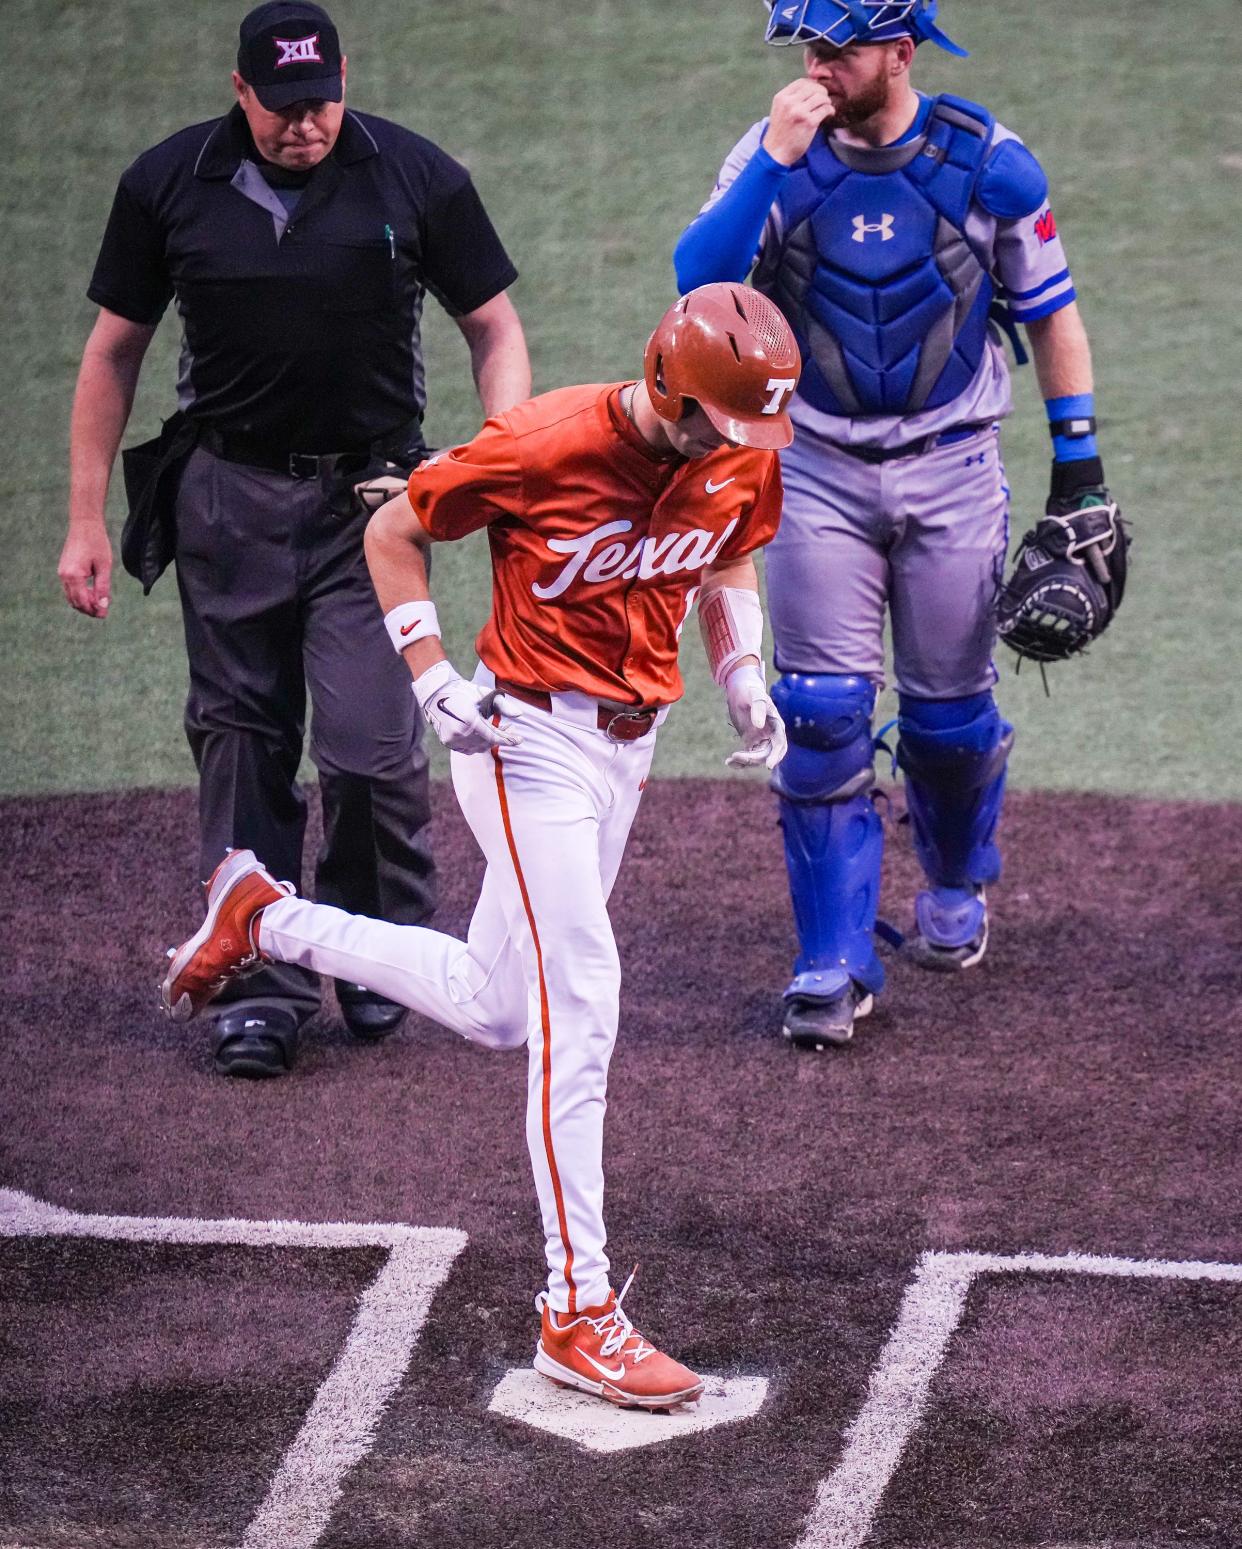 Texas' Jalin Flores crosses home plate after hitting a home run against UT-Arlington at UFCU Disch-Falk Field on April 23. He leads the team with 15 homers, and the Longhorns as a whole have already hit 90 of them this season.